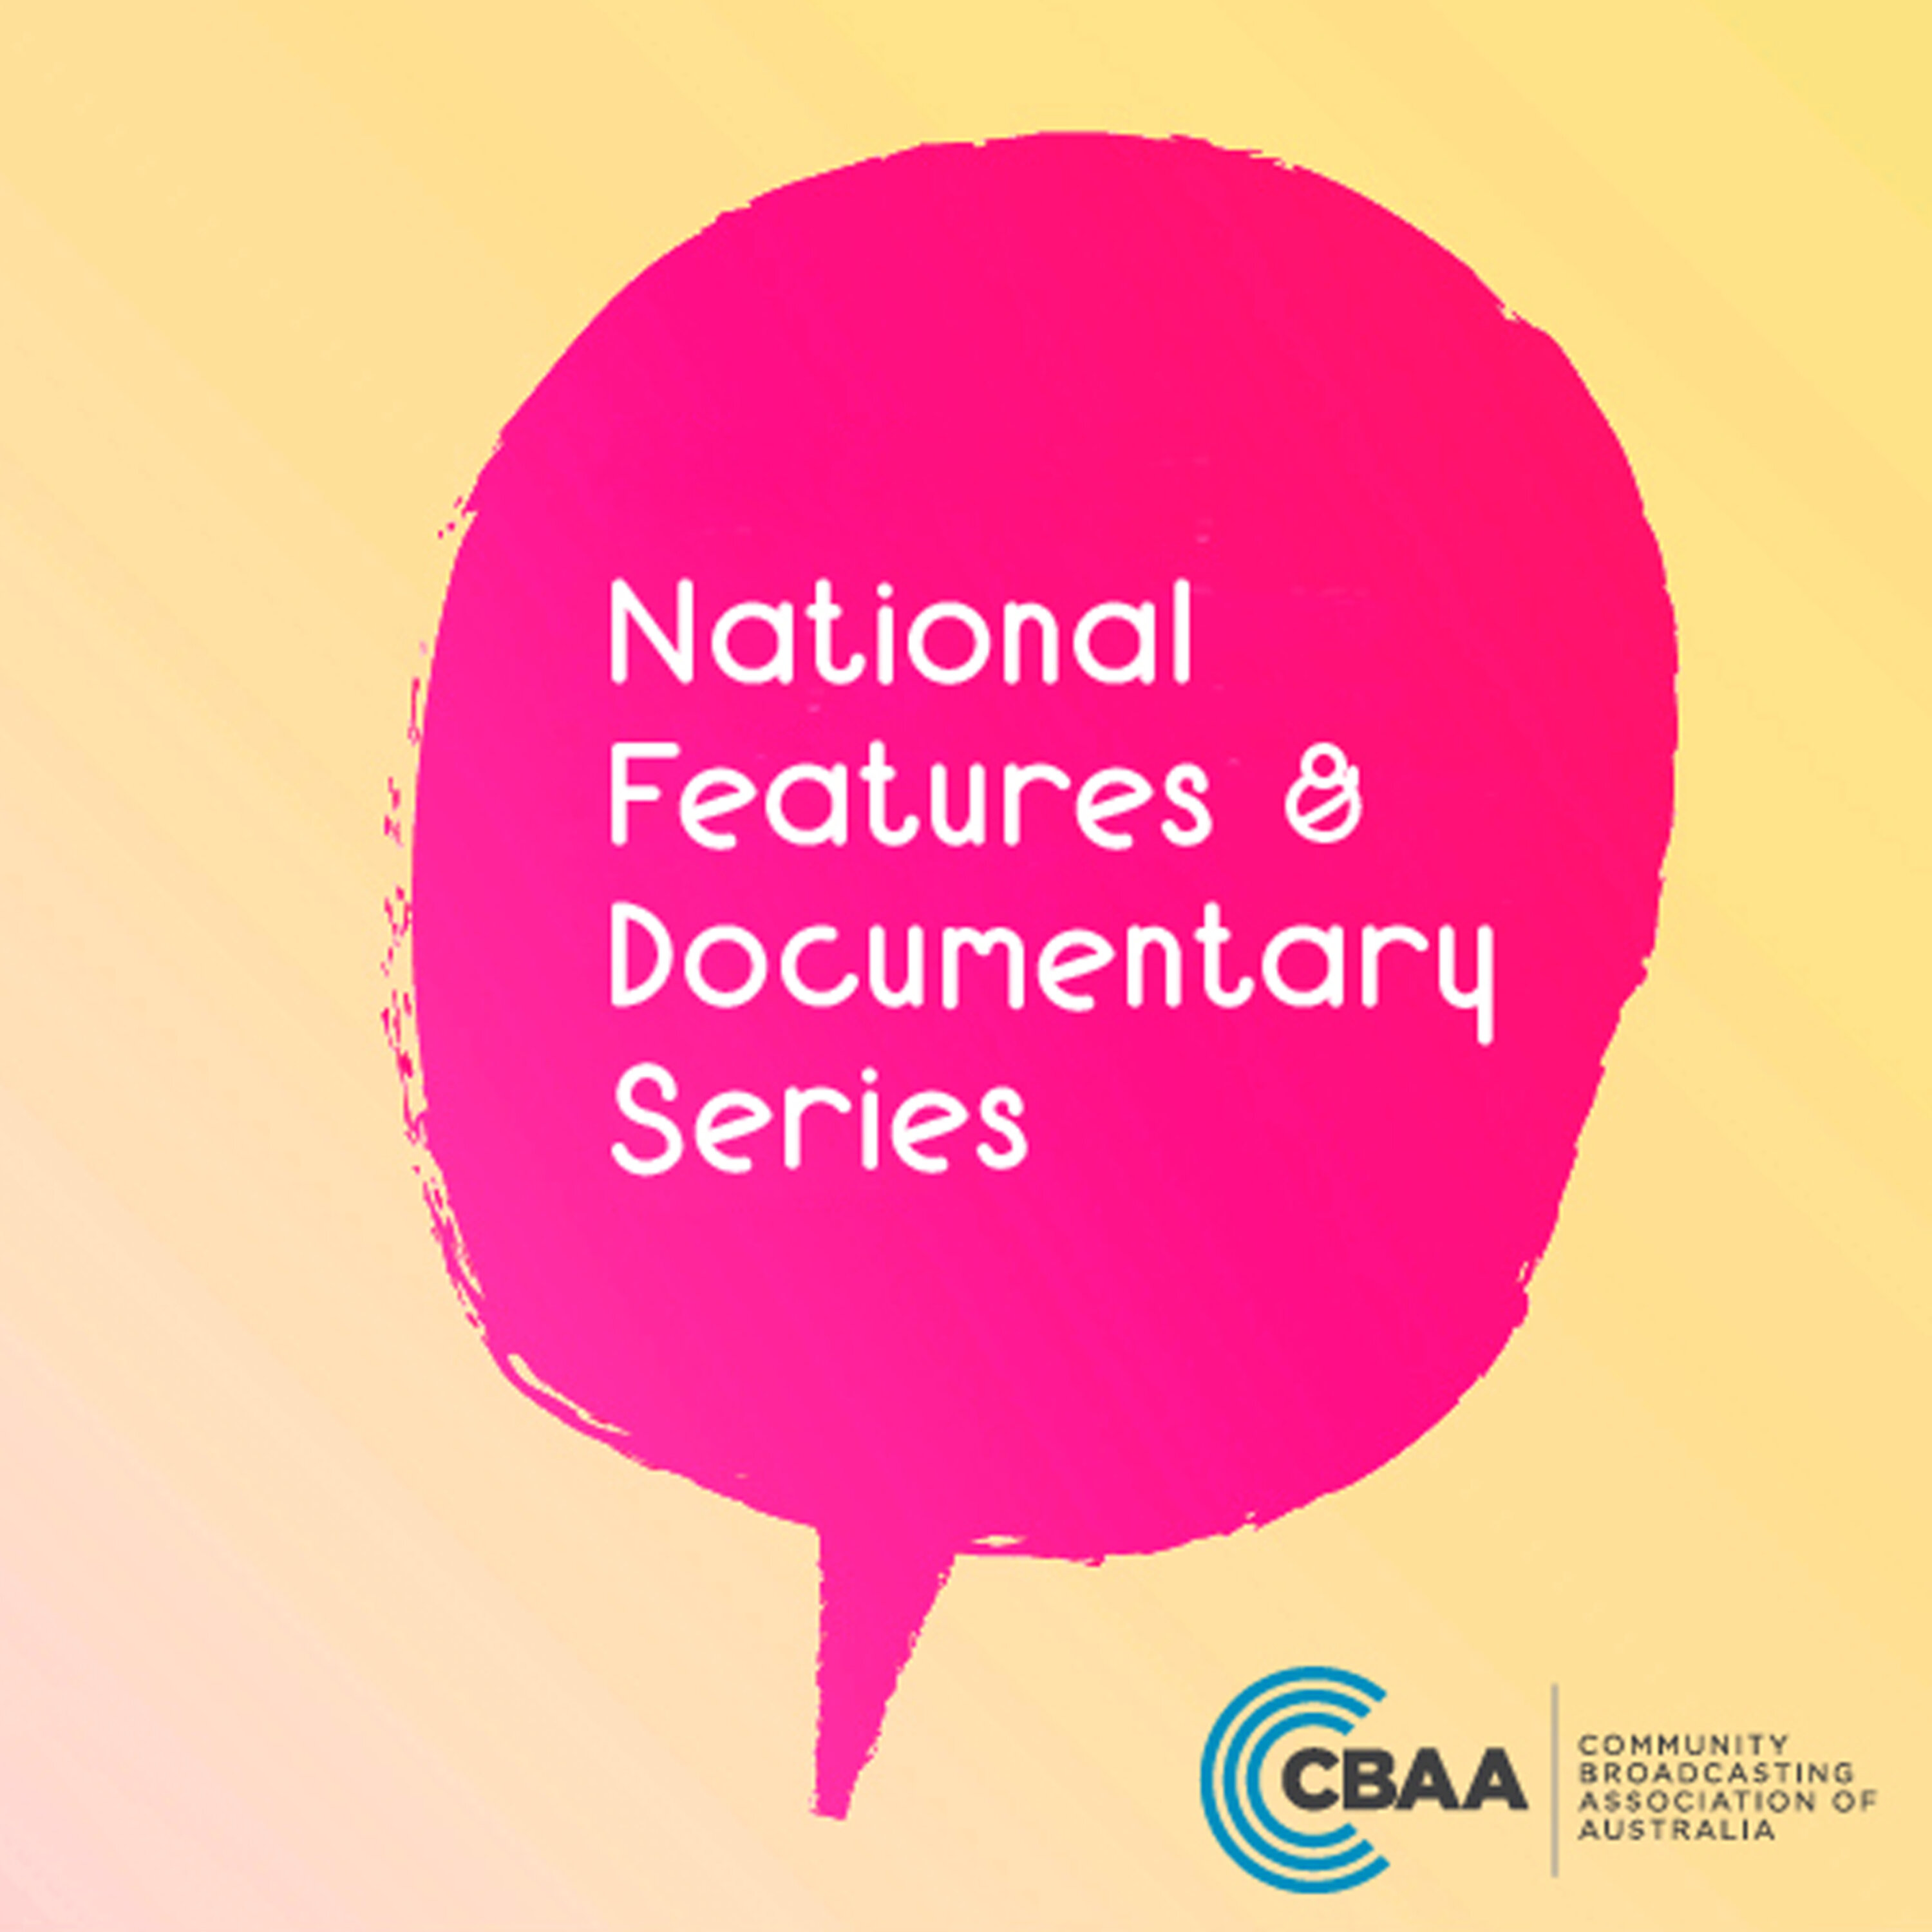 National Features & Documentary Series